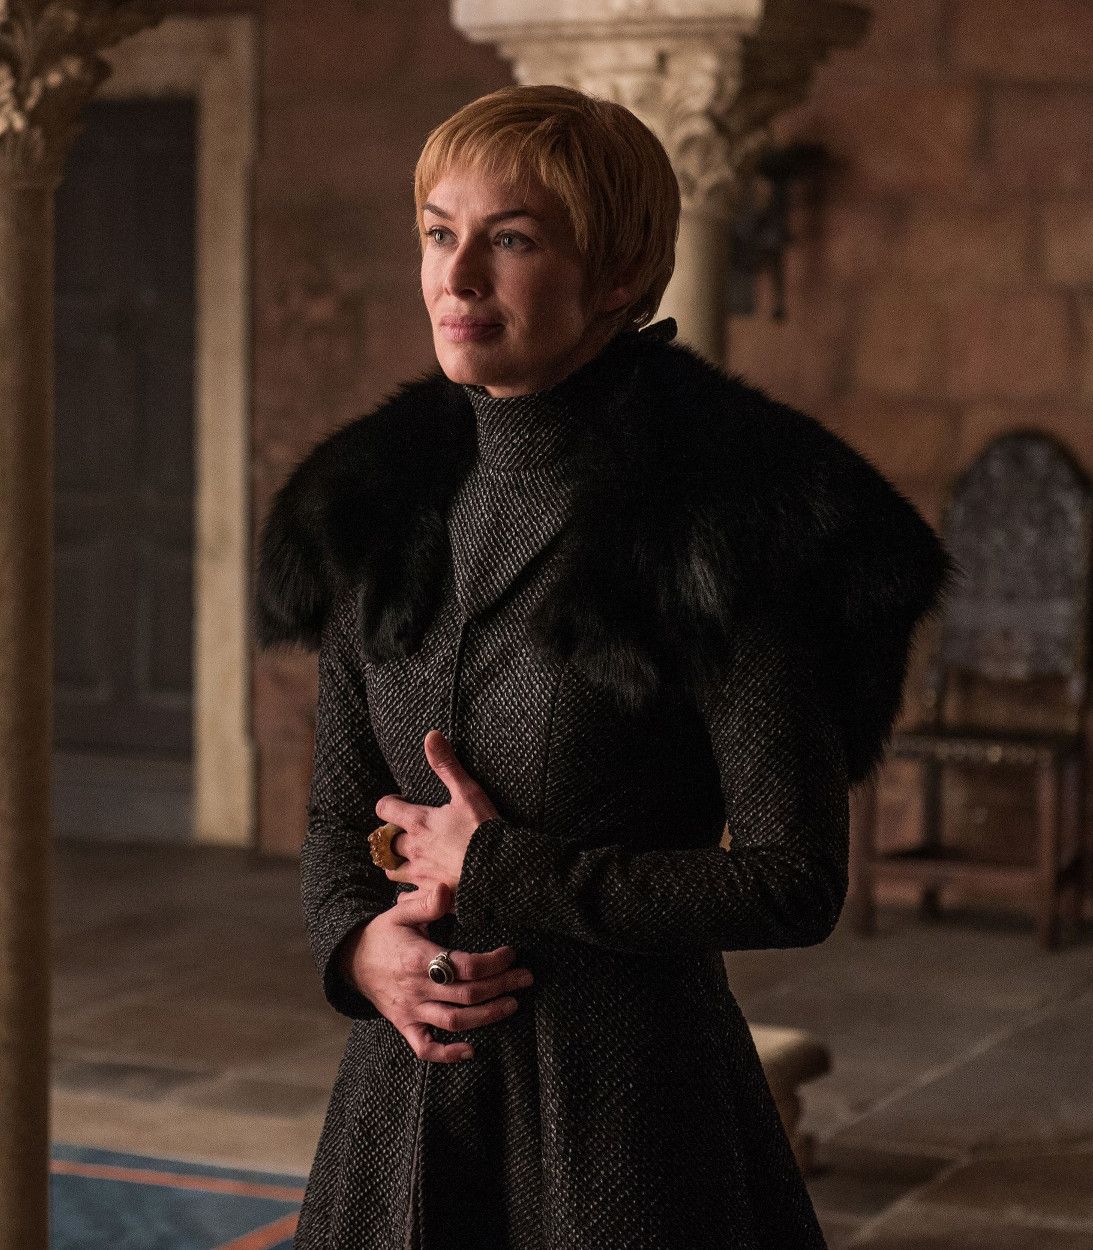 Lena Headey As Cersei Lannister In Game Of Thrones